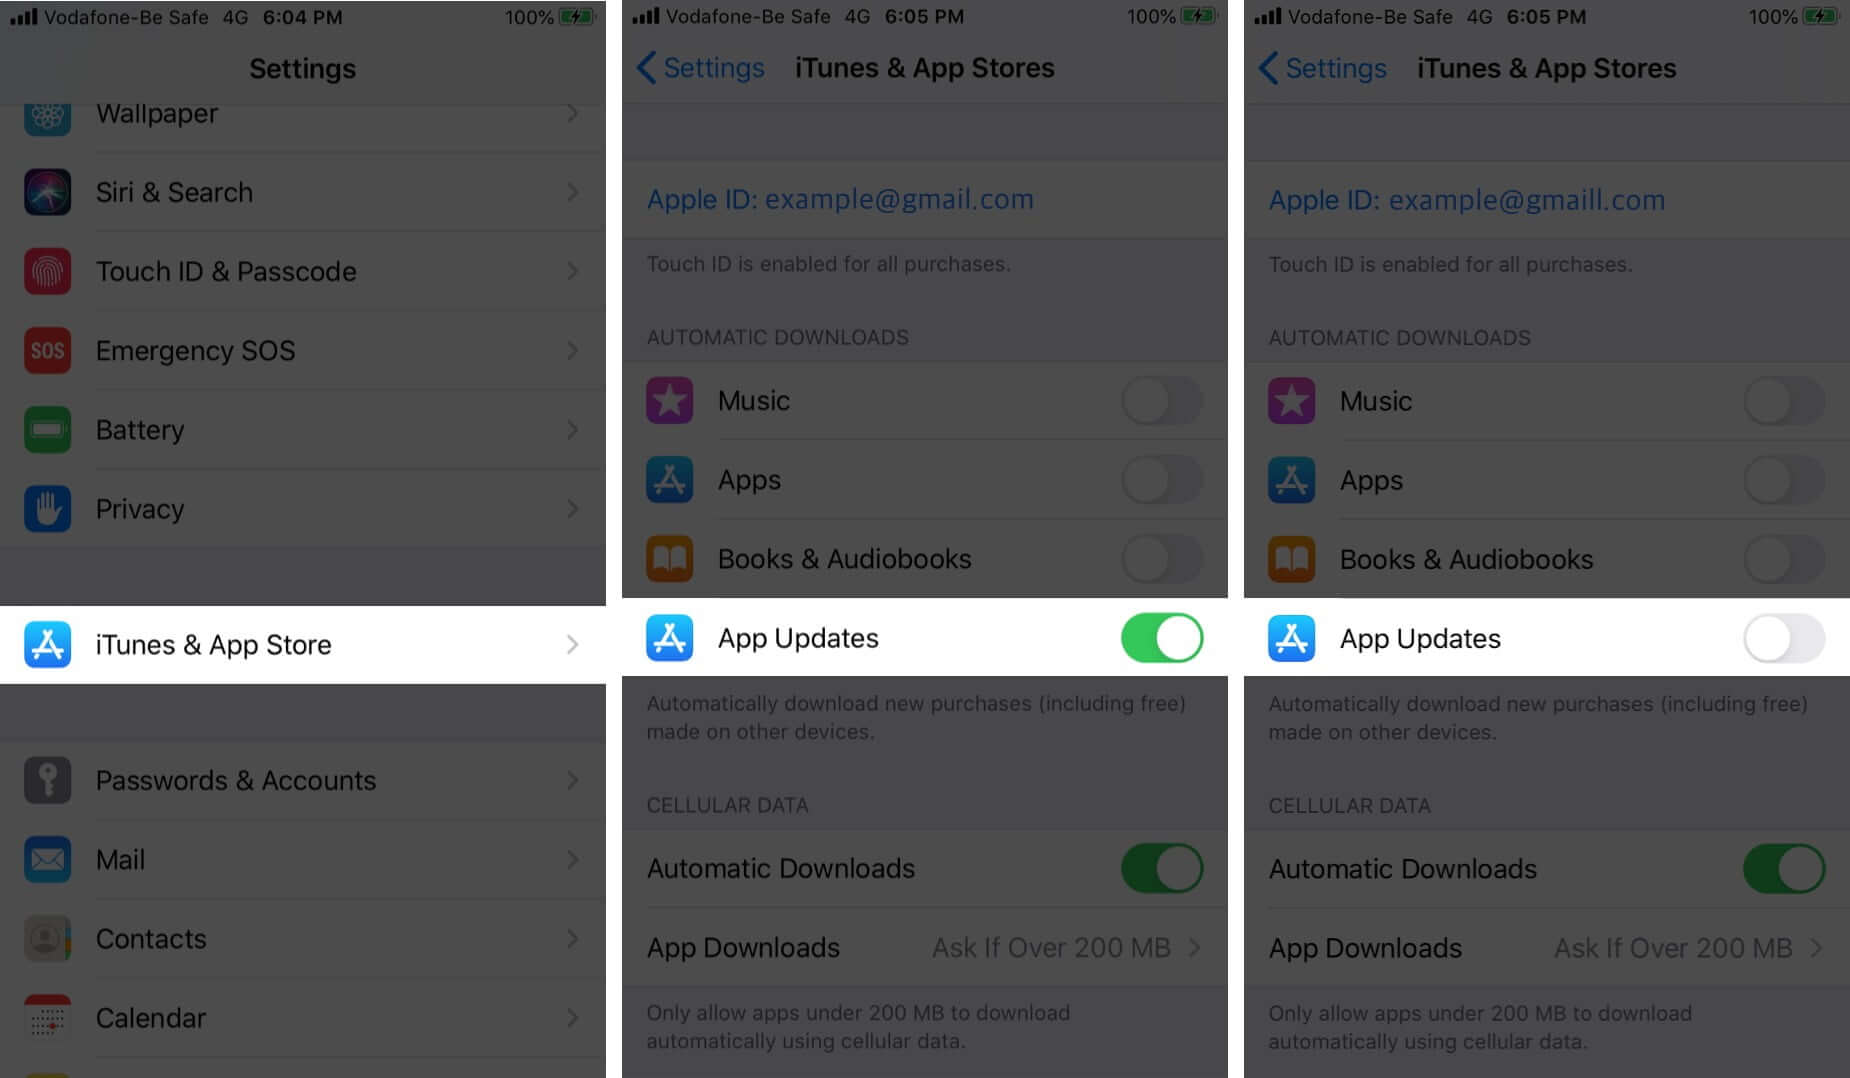 Disable Automatic App Updates in iTunes & App Store on iPhone